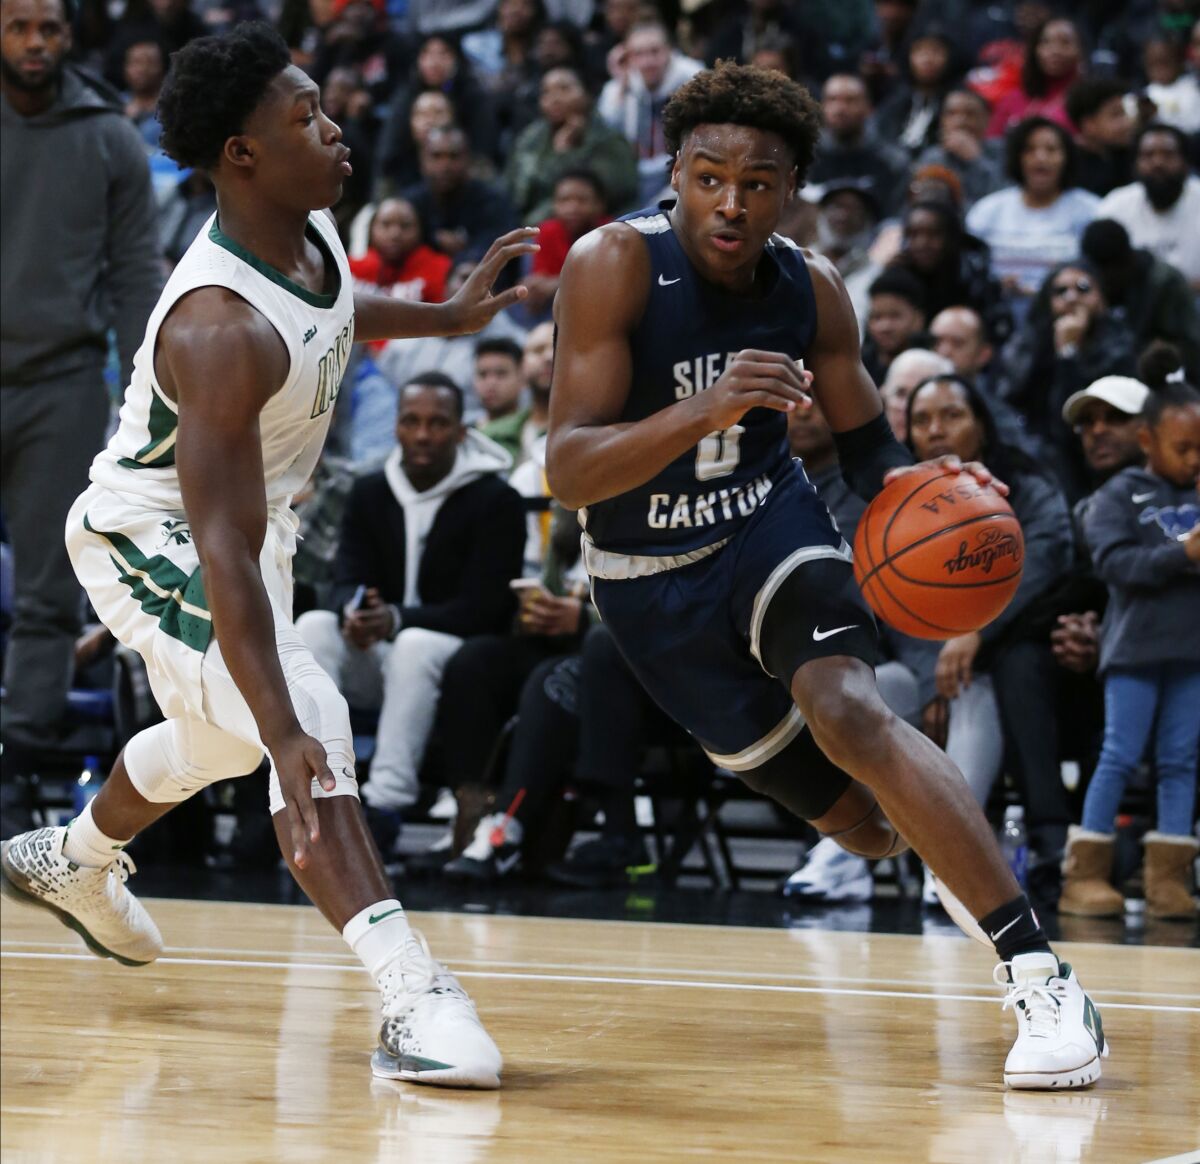 Sierra Canyon's Bronny James (0) drives against St. Vincent-St. Mary's Darrian Lewis during the second half of a high school showcase game on Dec. 14, 2019, in Columbus, Ohio.